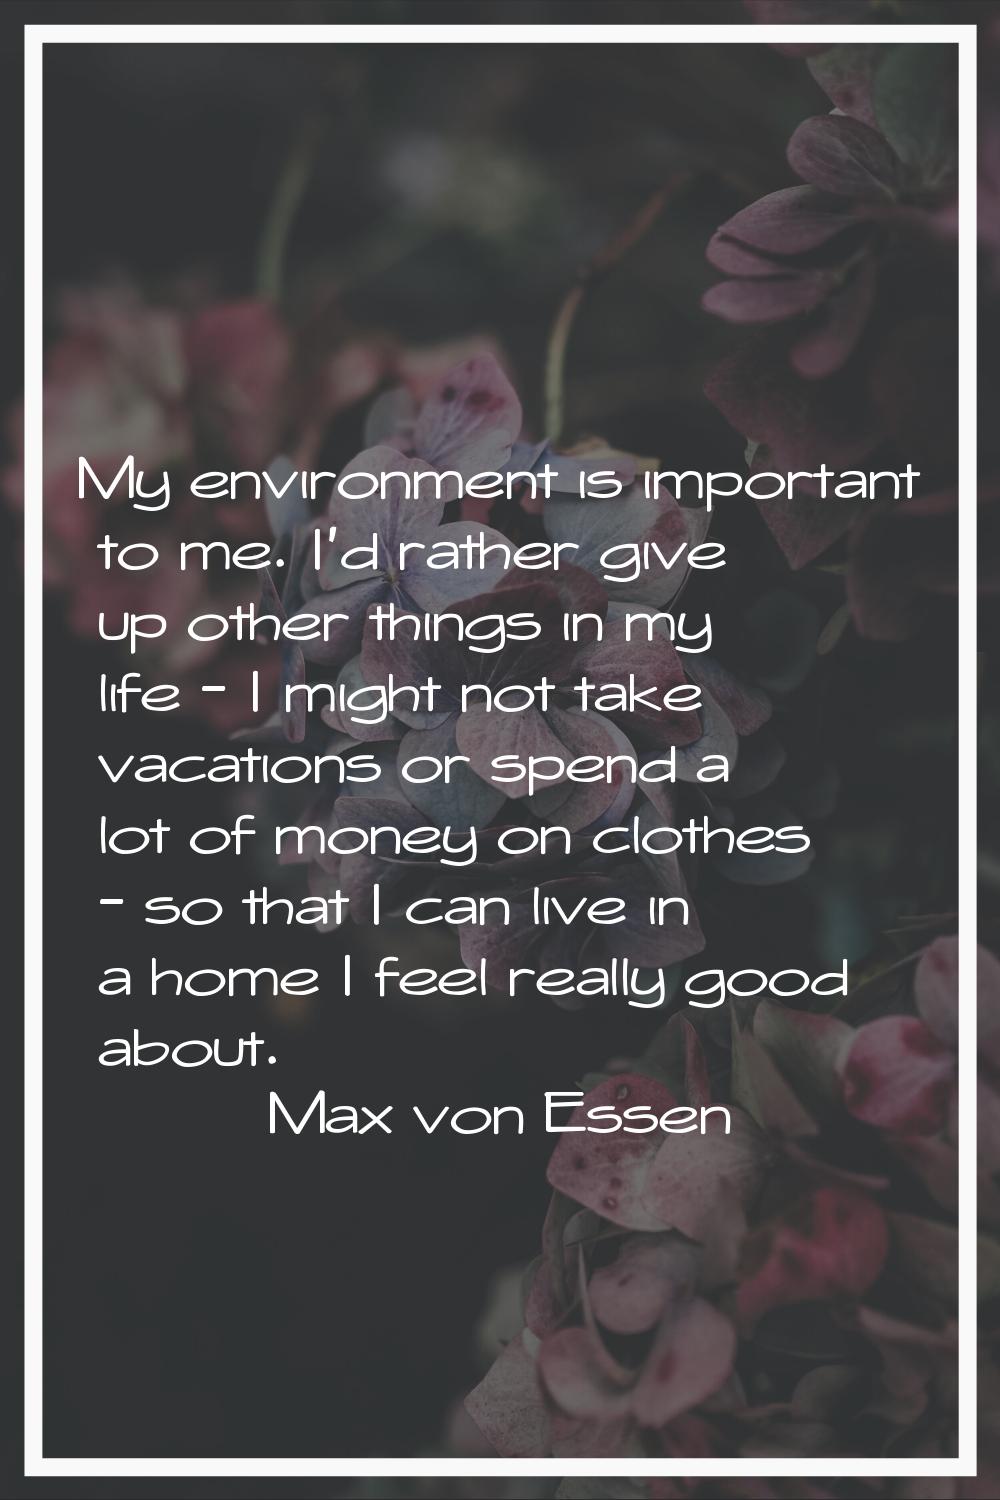 My environment is important to me. I'd rather give up other things in my life - I might not take va